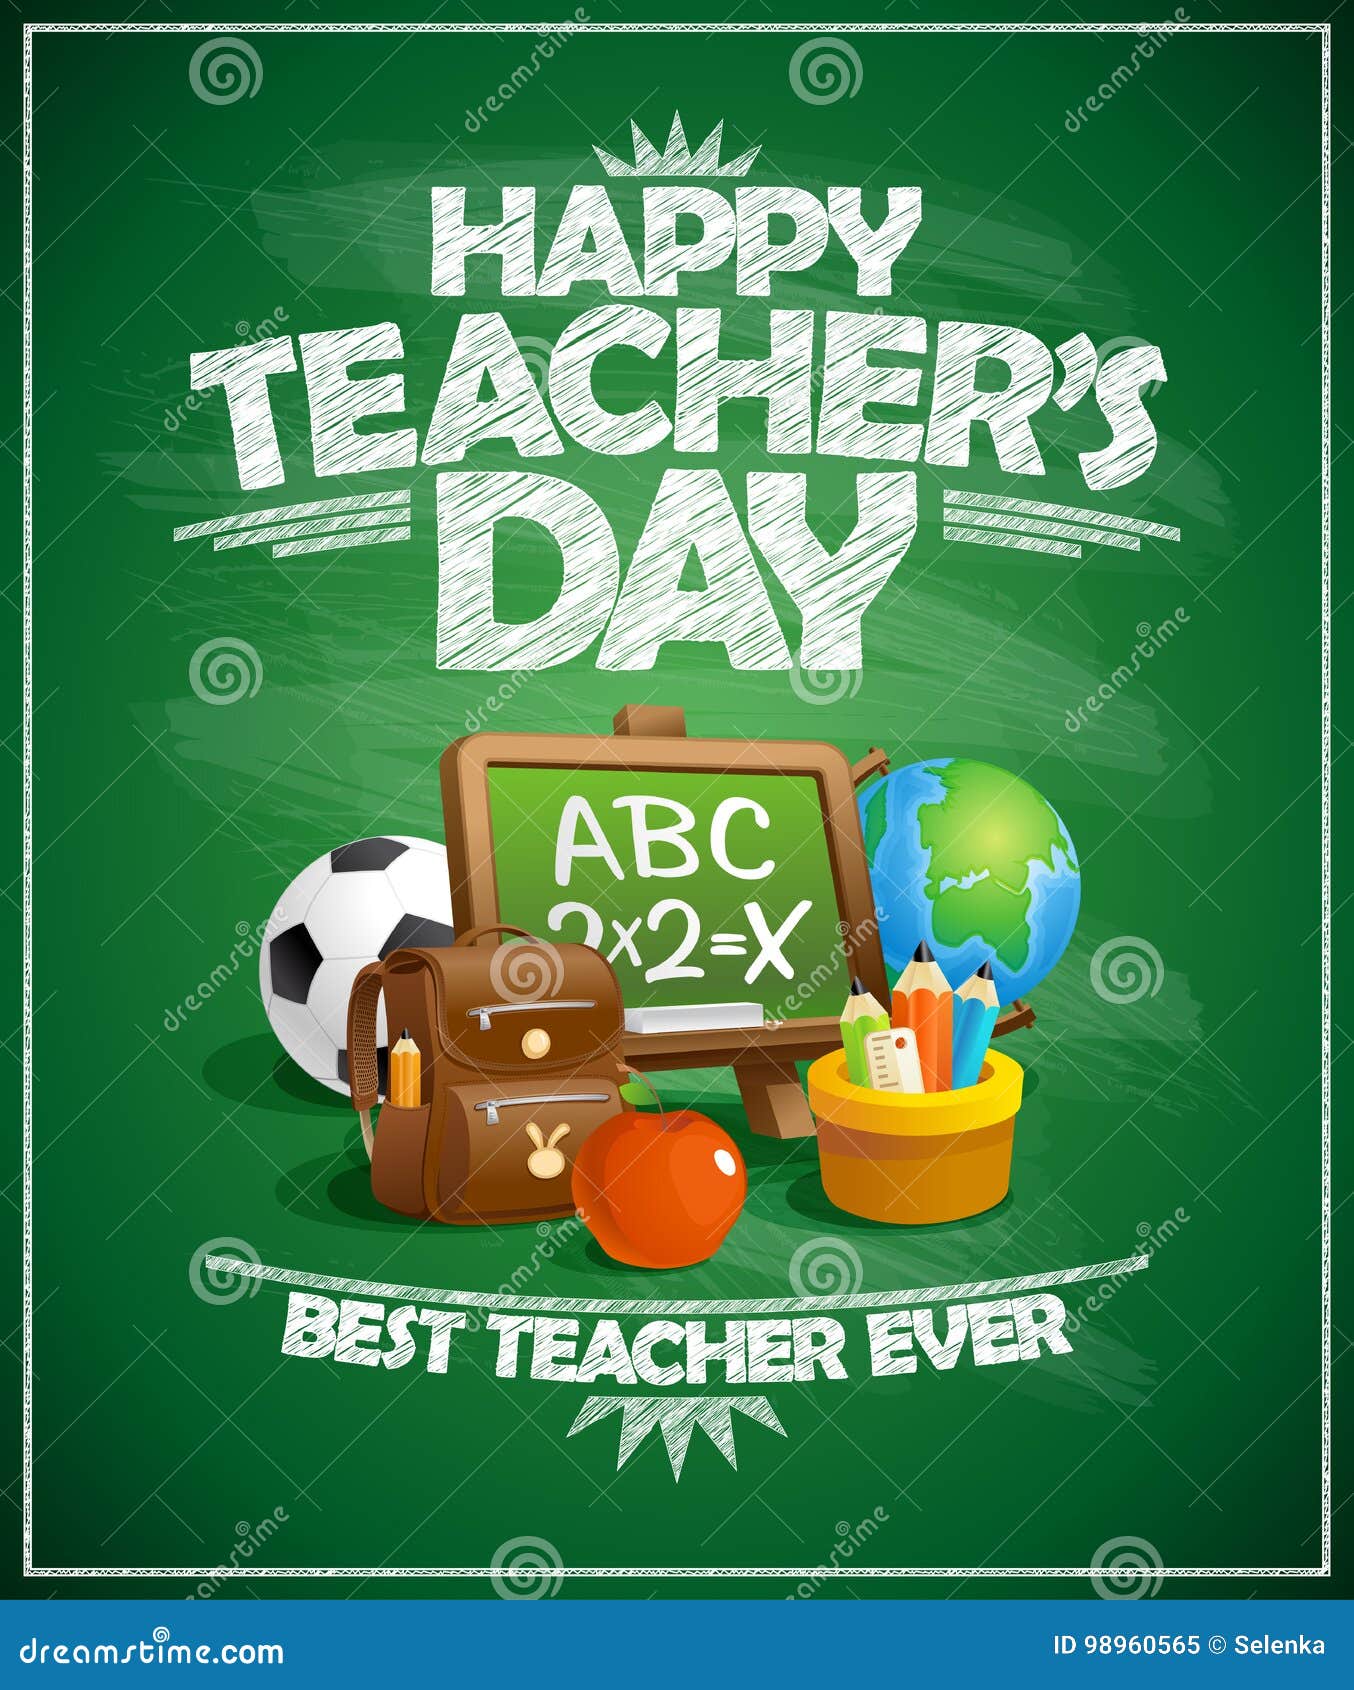 Premium Vector | Happy teachers day sketch with books and pencils